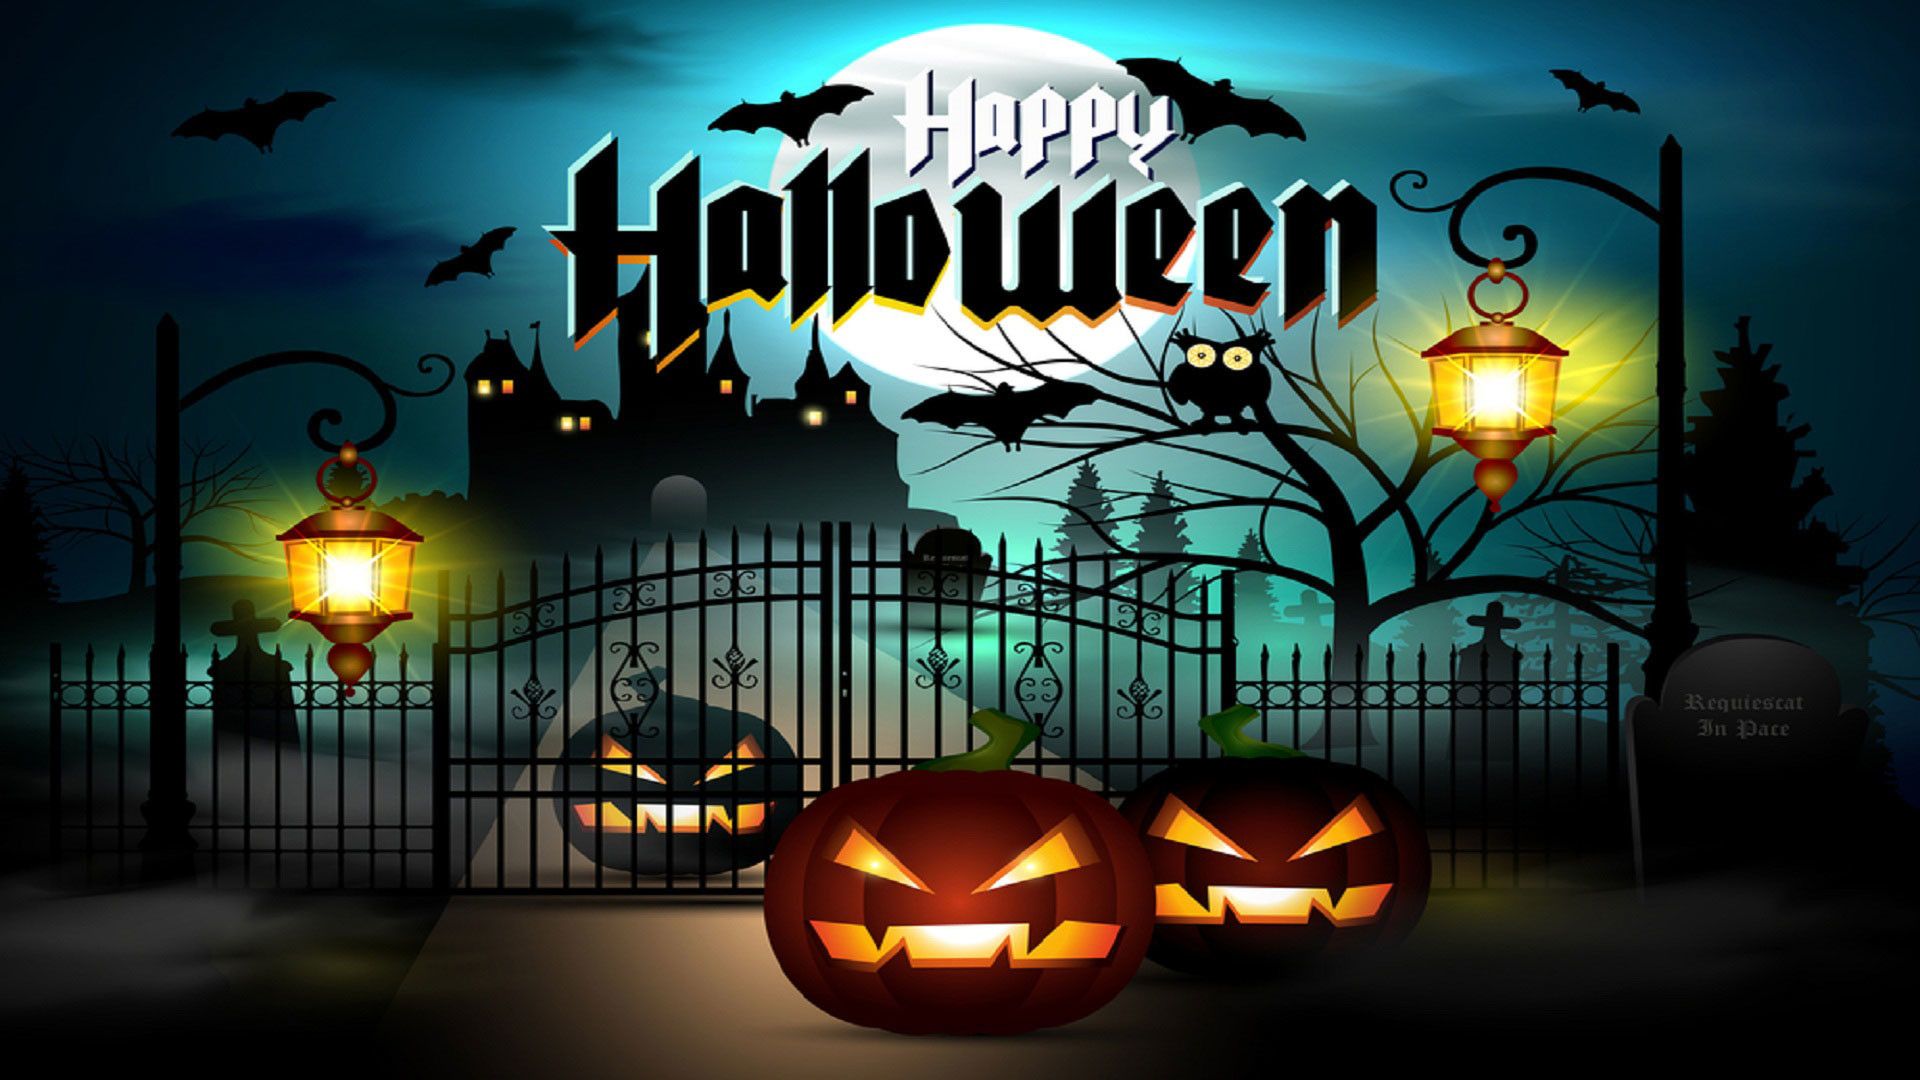 Happy Halloween 2019: Image, HD Picture, Photo, GIF, Whatsapp DP for 31st October 2019